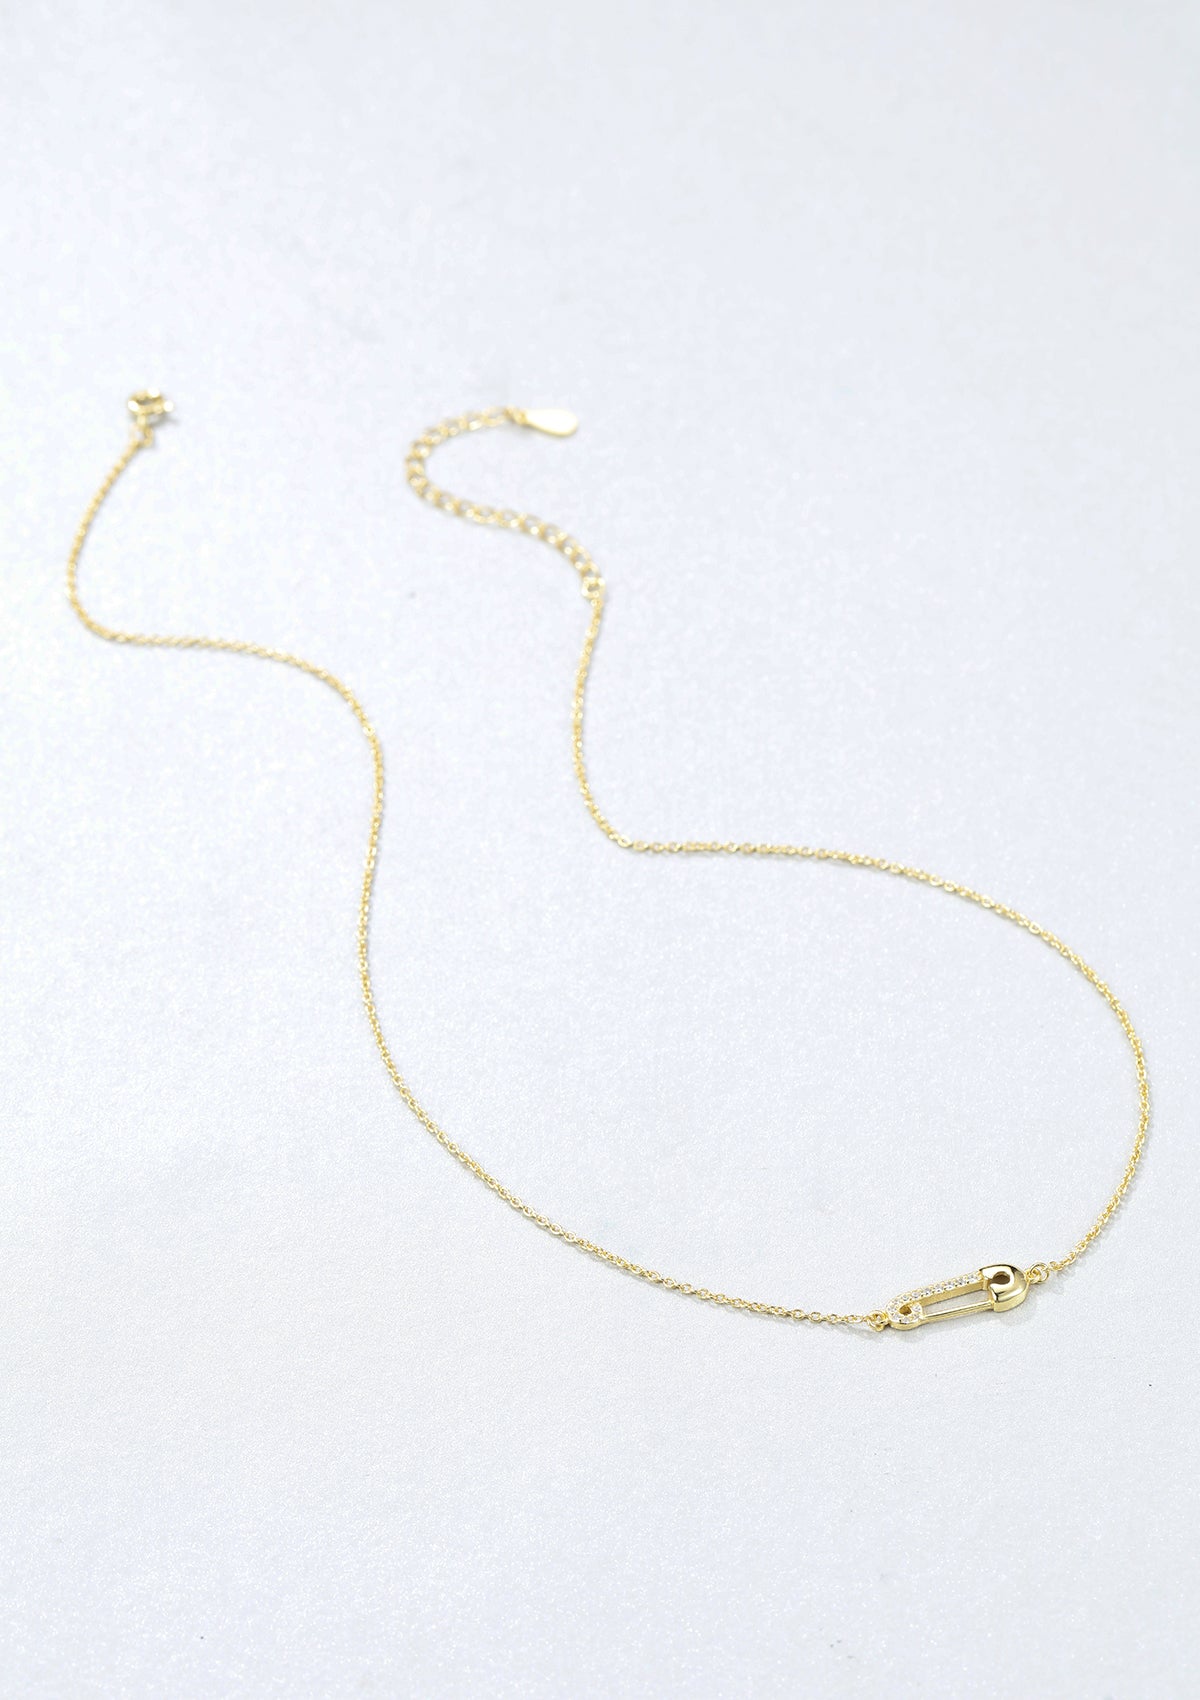 Safety Pin Pendant Necklace Sterling Silver Gold